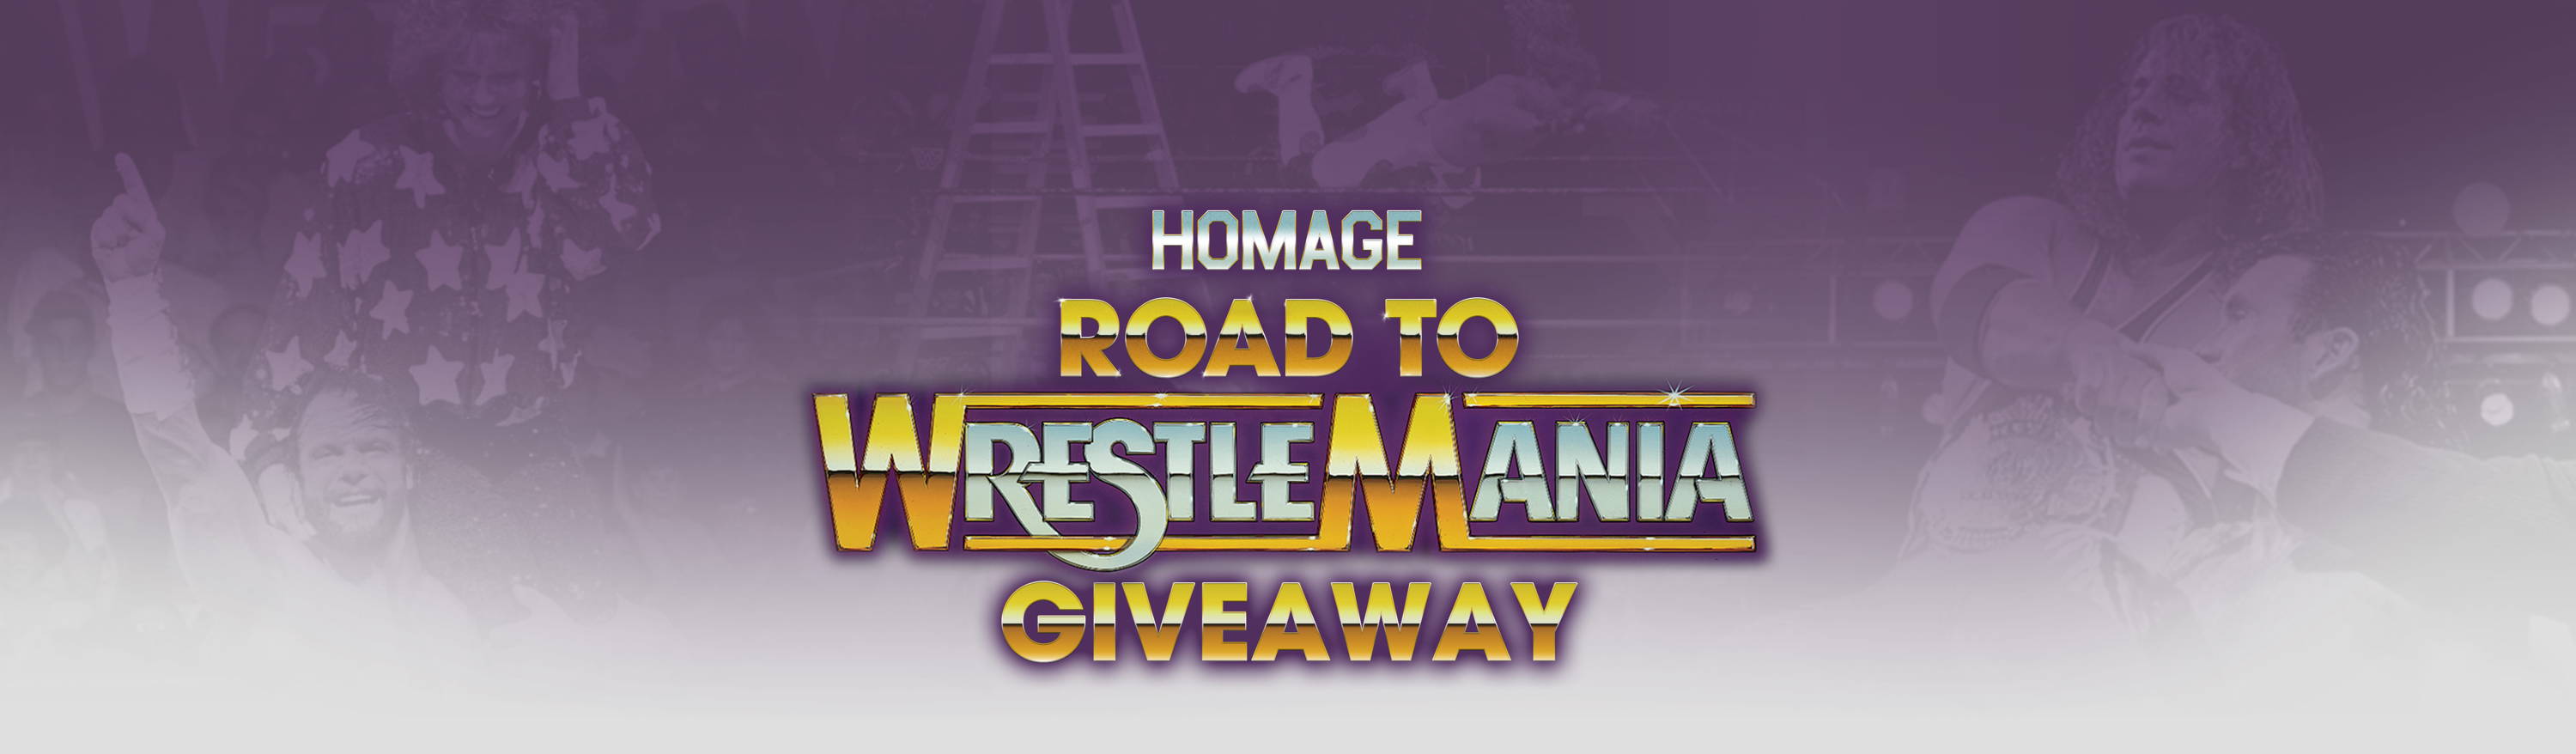 HOMAGE Road to WrestleMania Giveaway